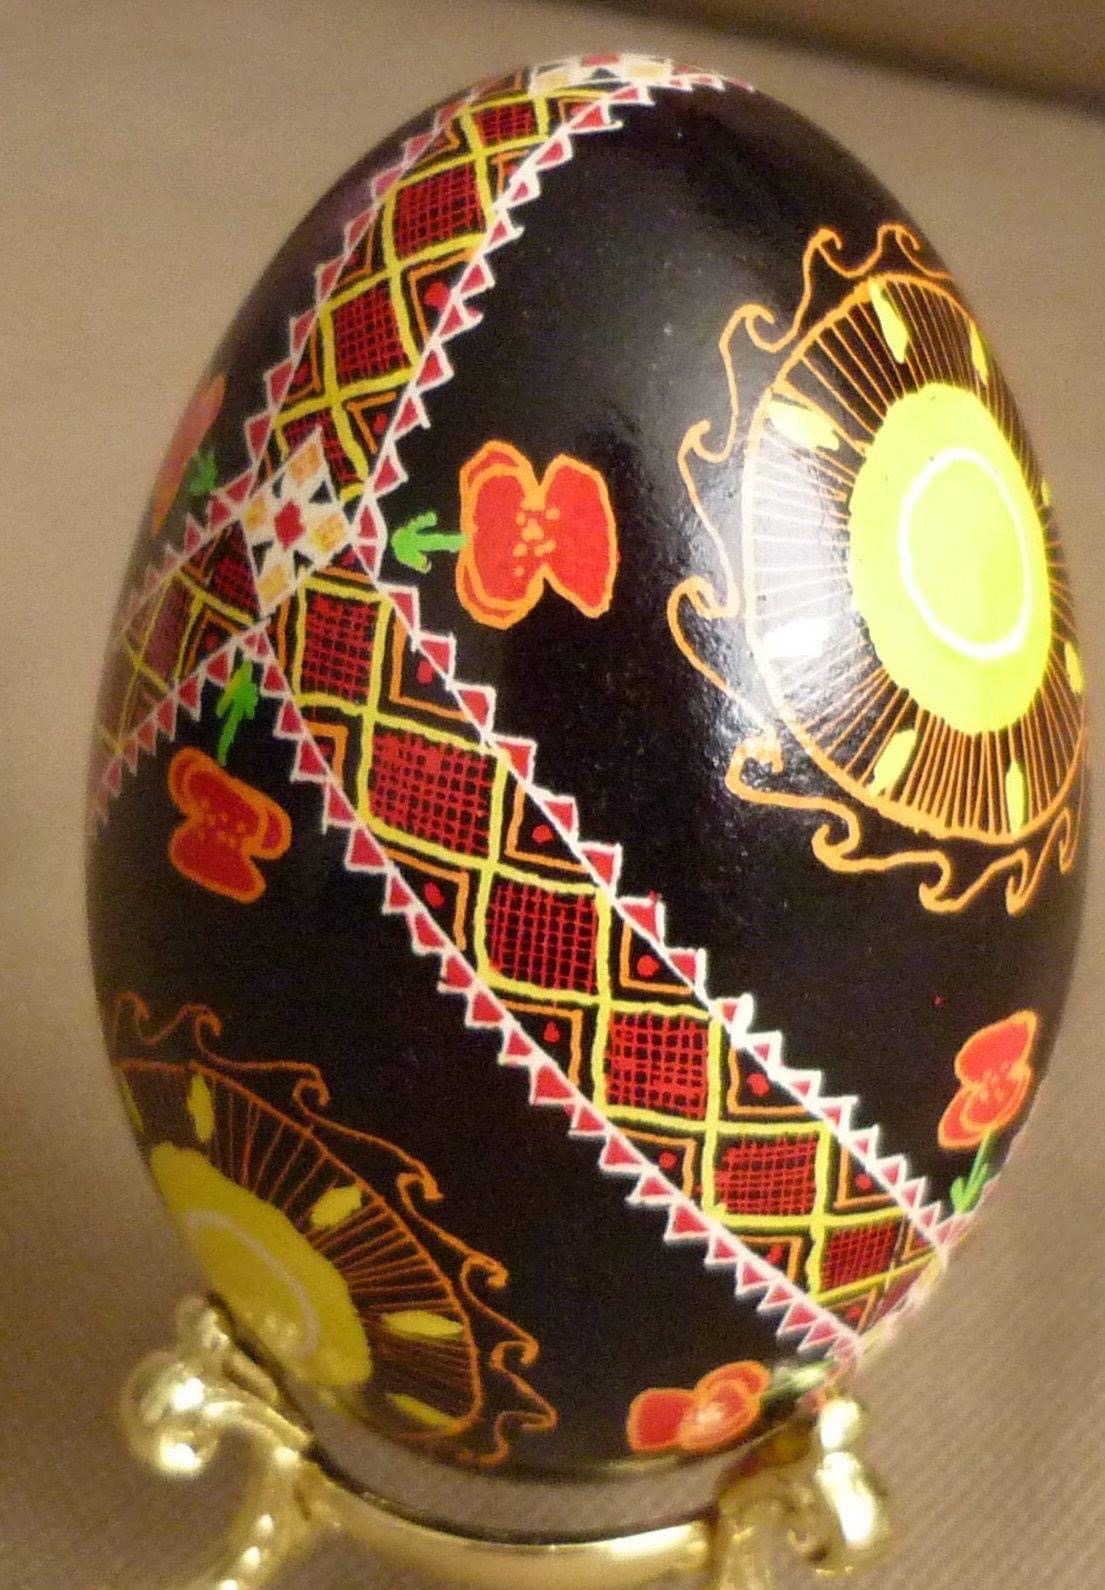 a goose-egg pysanka with poppies, suns, and neverending lines